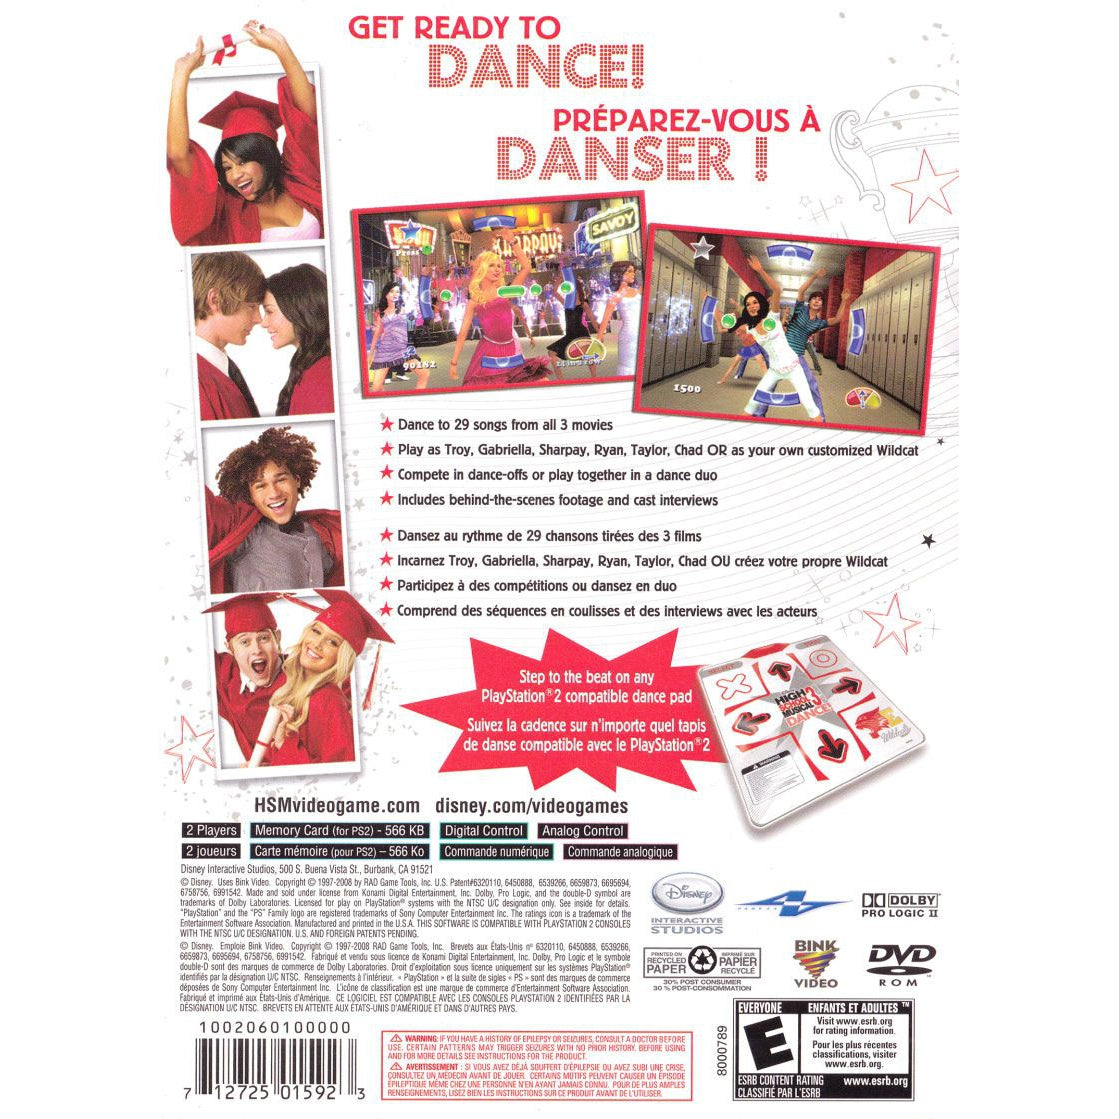 Disney High School Musical 3: Senior Year Dance! - PlayStation 2 (PS2) Game Complete - YourGamingShop.com - Buy, Sell, Trade Video Games Online. 120 Day Warranty. Satisfaction Guaranteed.